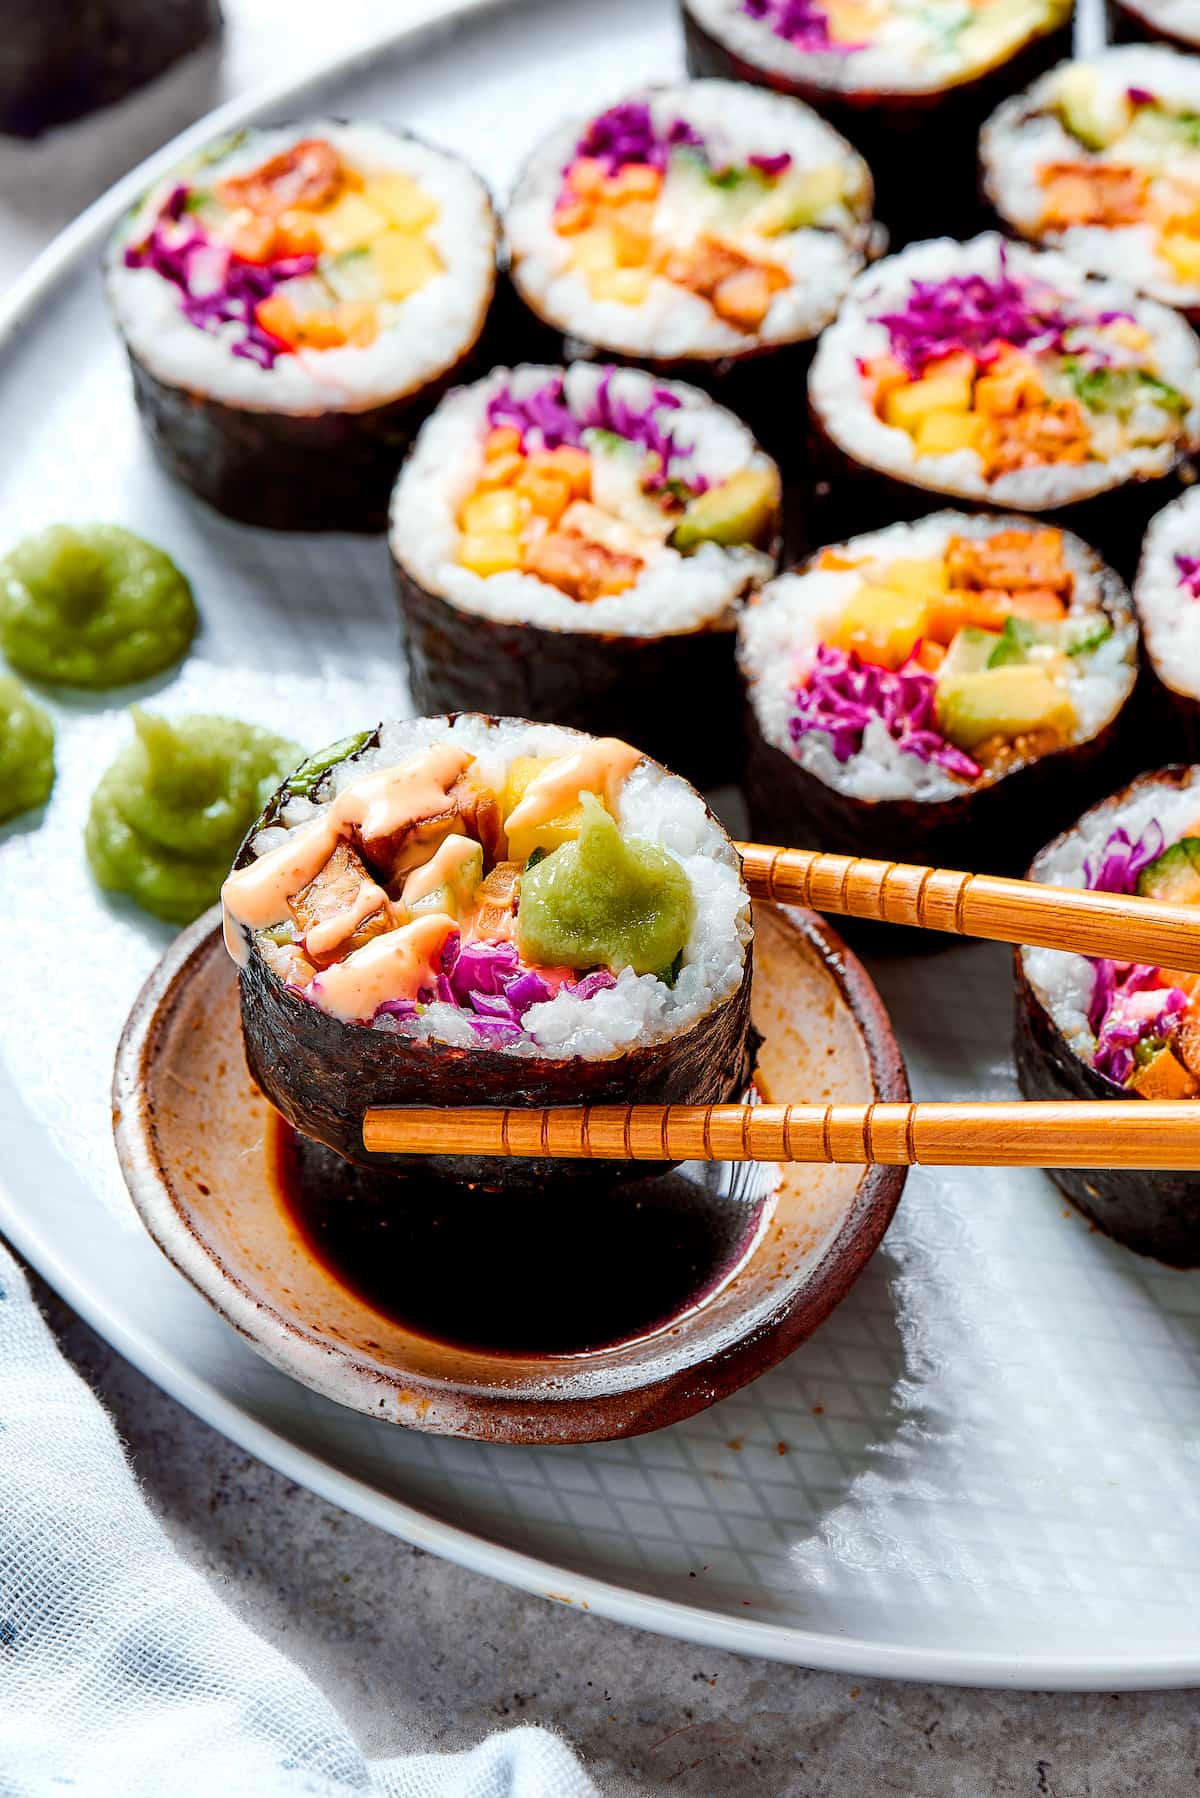 Chopsticks dipping a piece of sushi into soy sauce